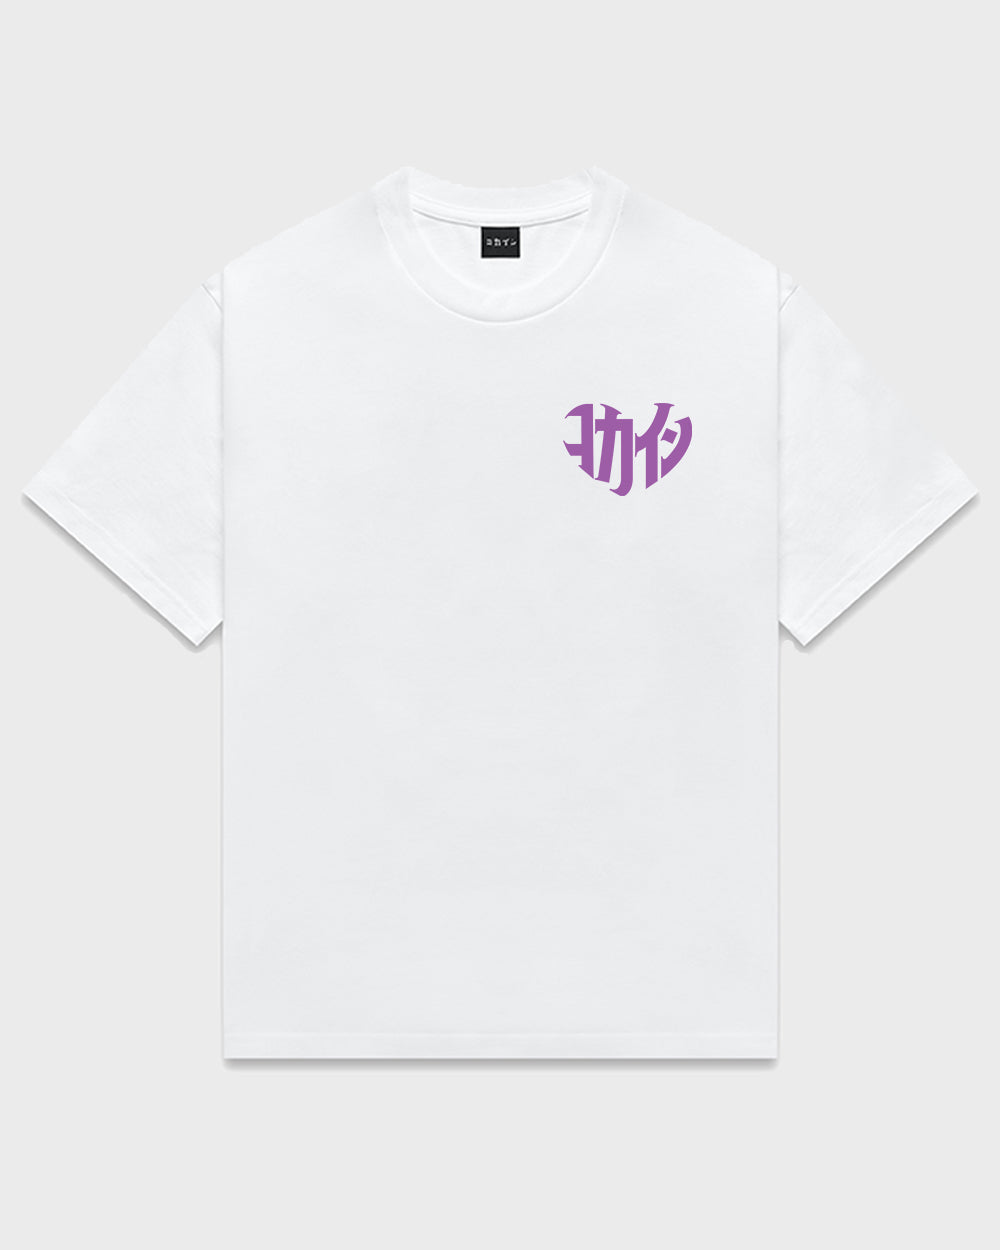 S14 "Love Yours" T Shirt // White